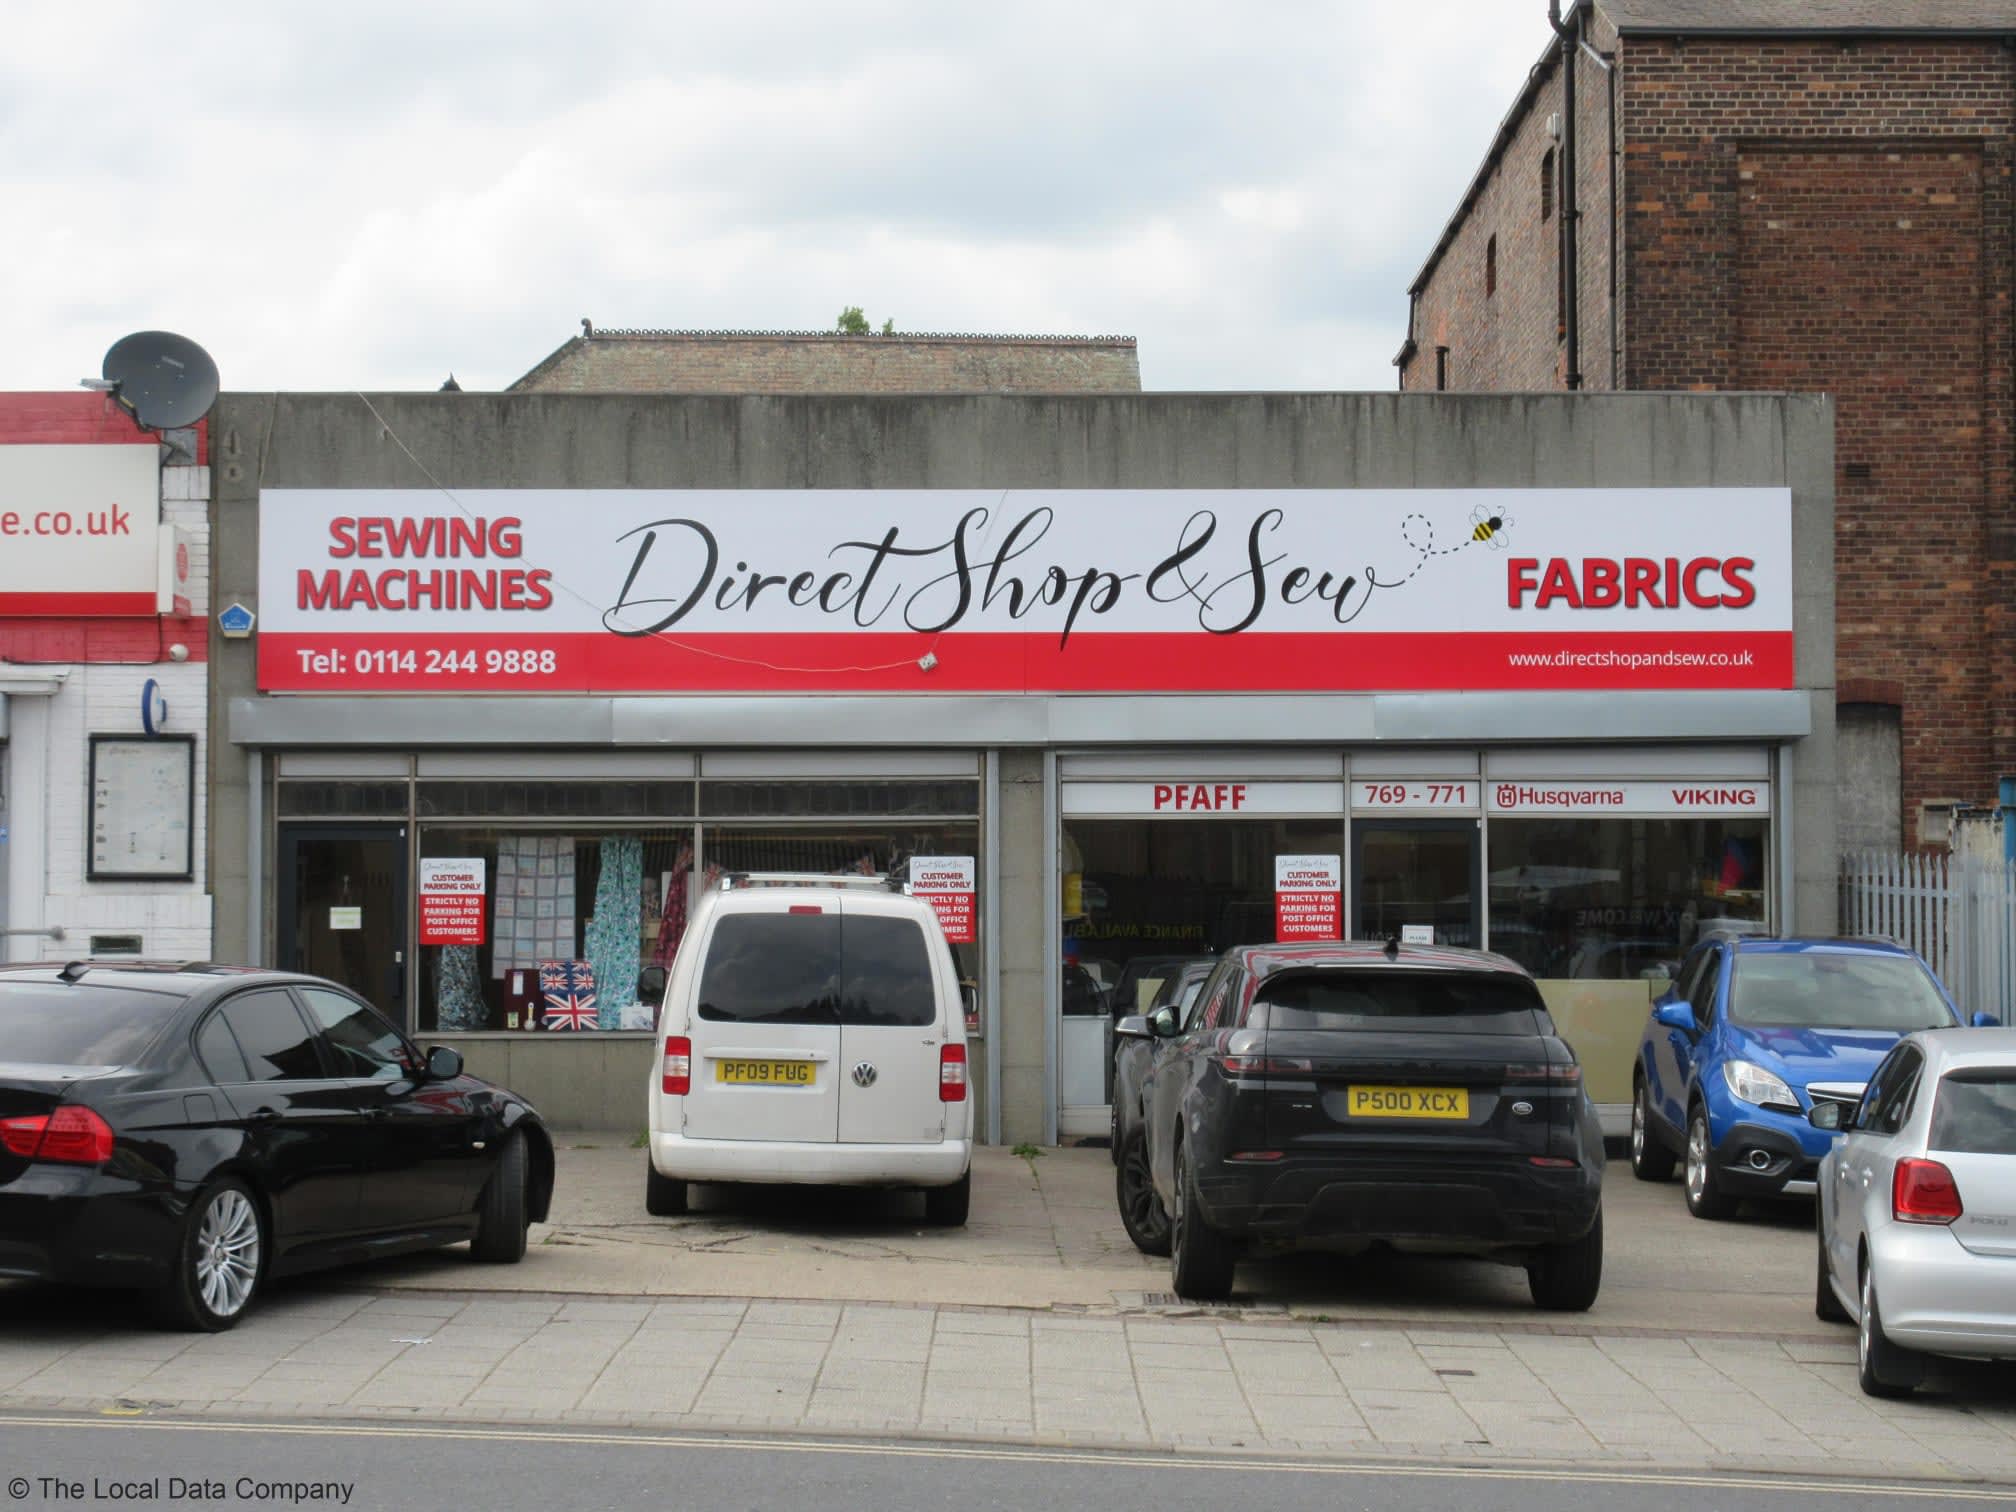 Images Direct Shop and Sew Ltd